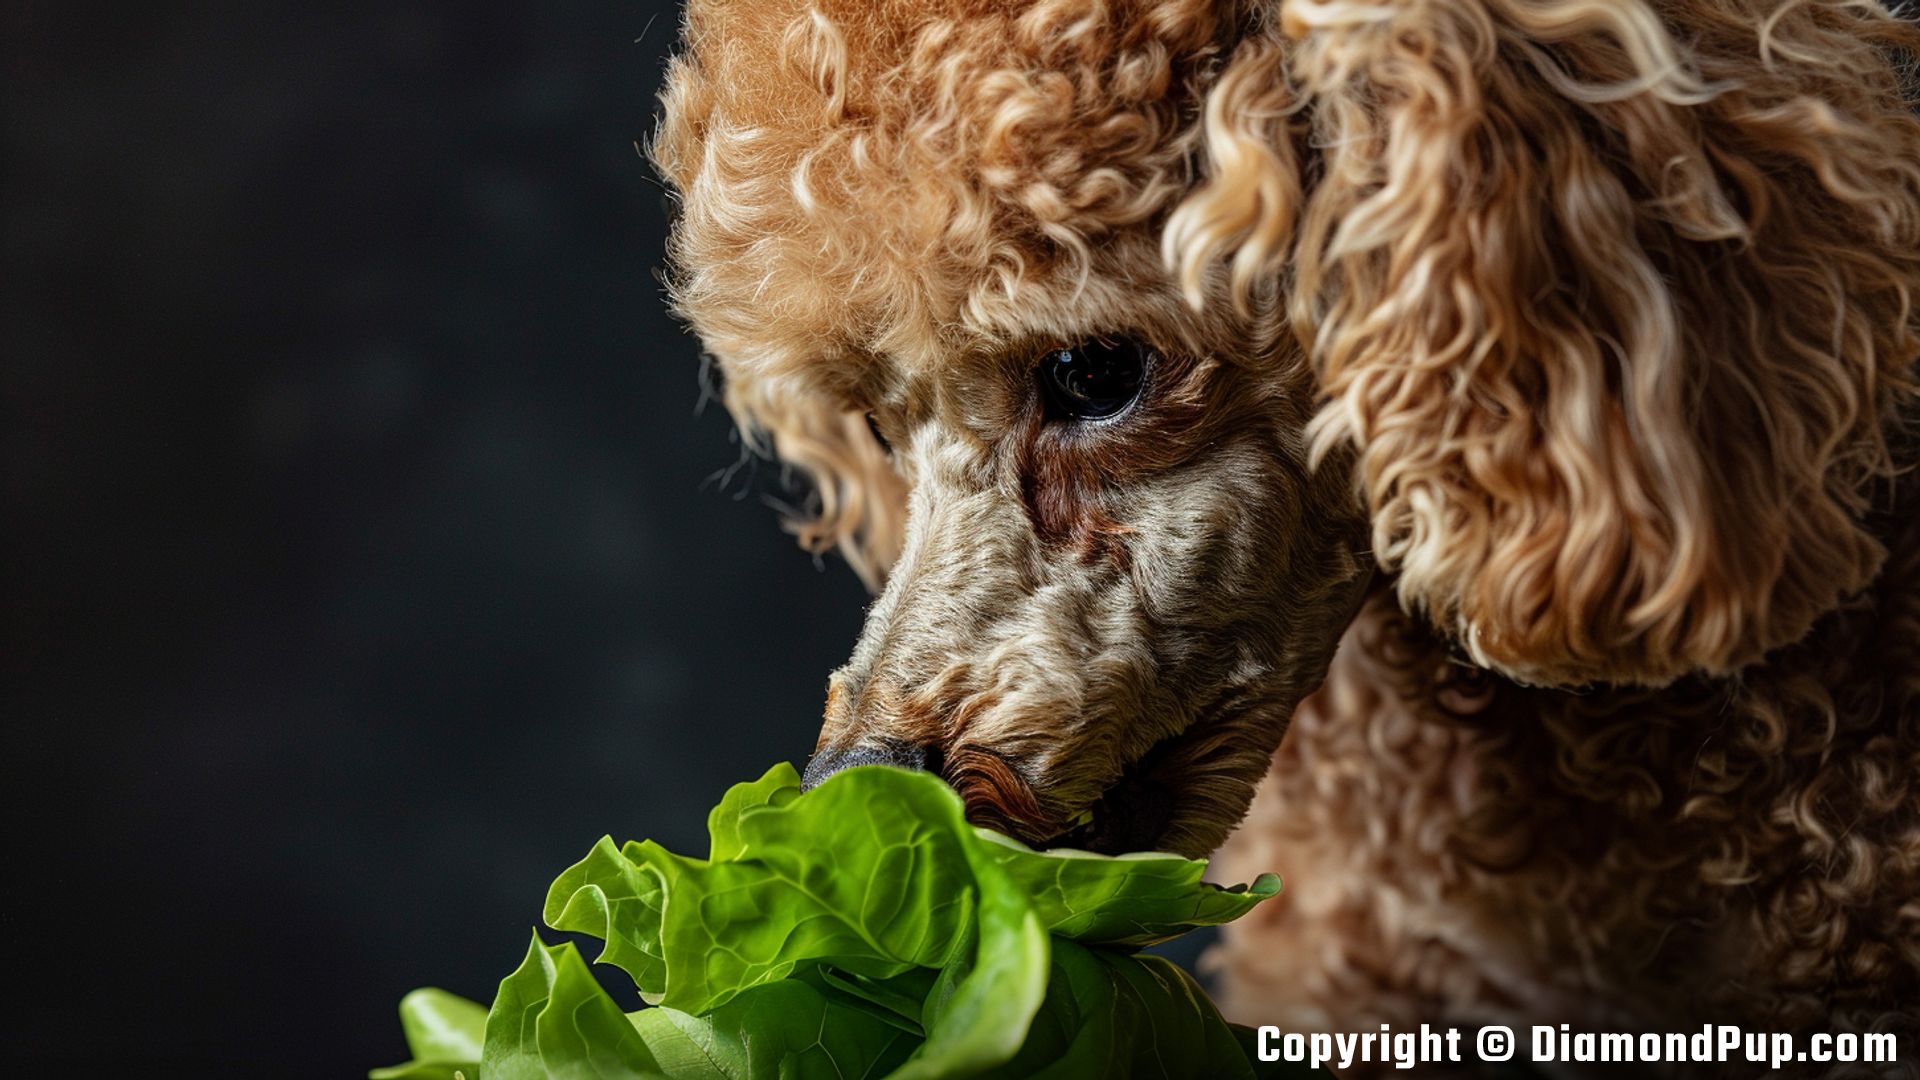 Image of a Cute Poodle Snacking on Lettuce